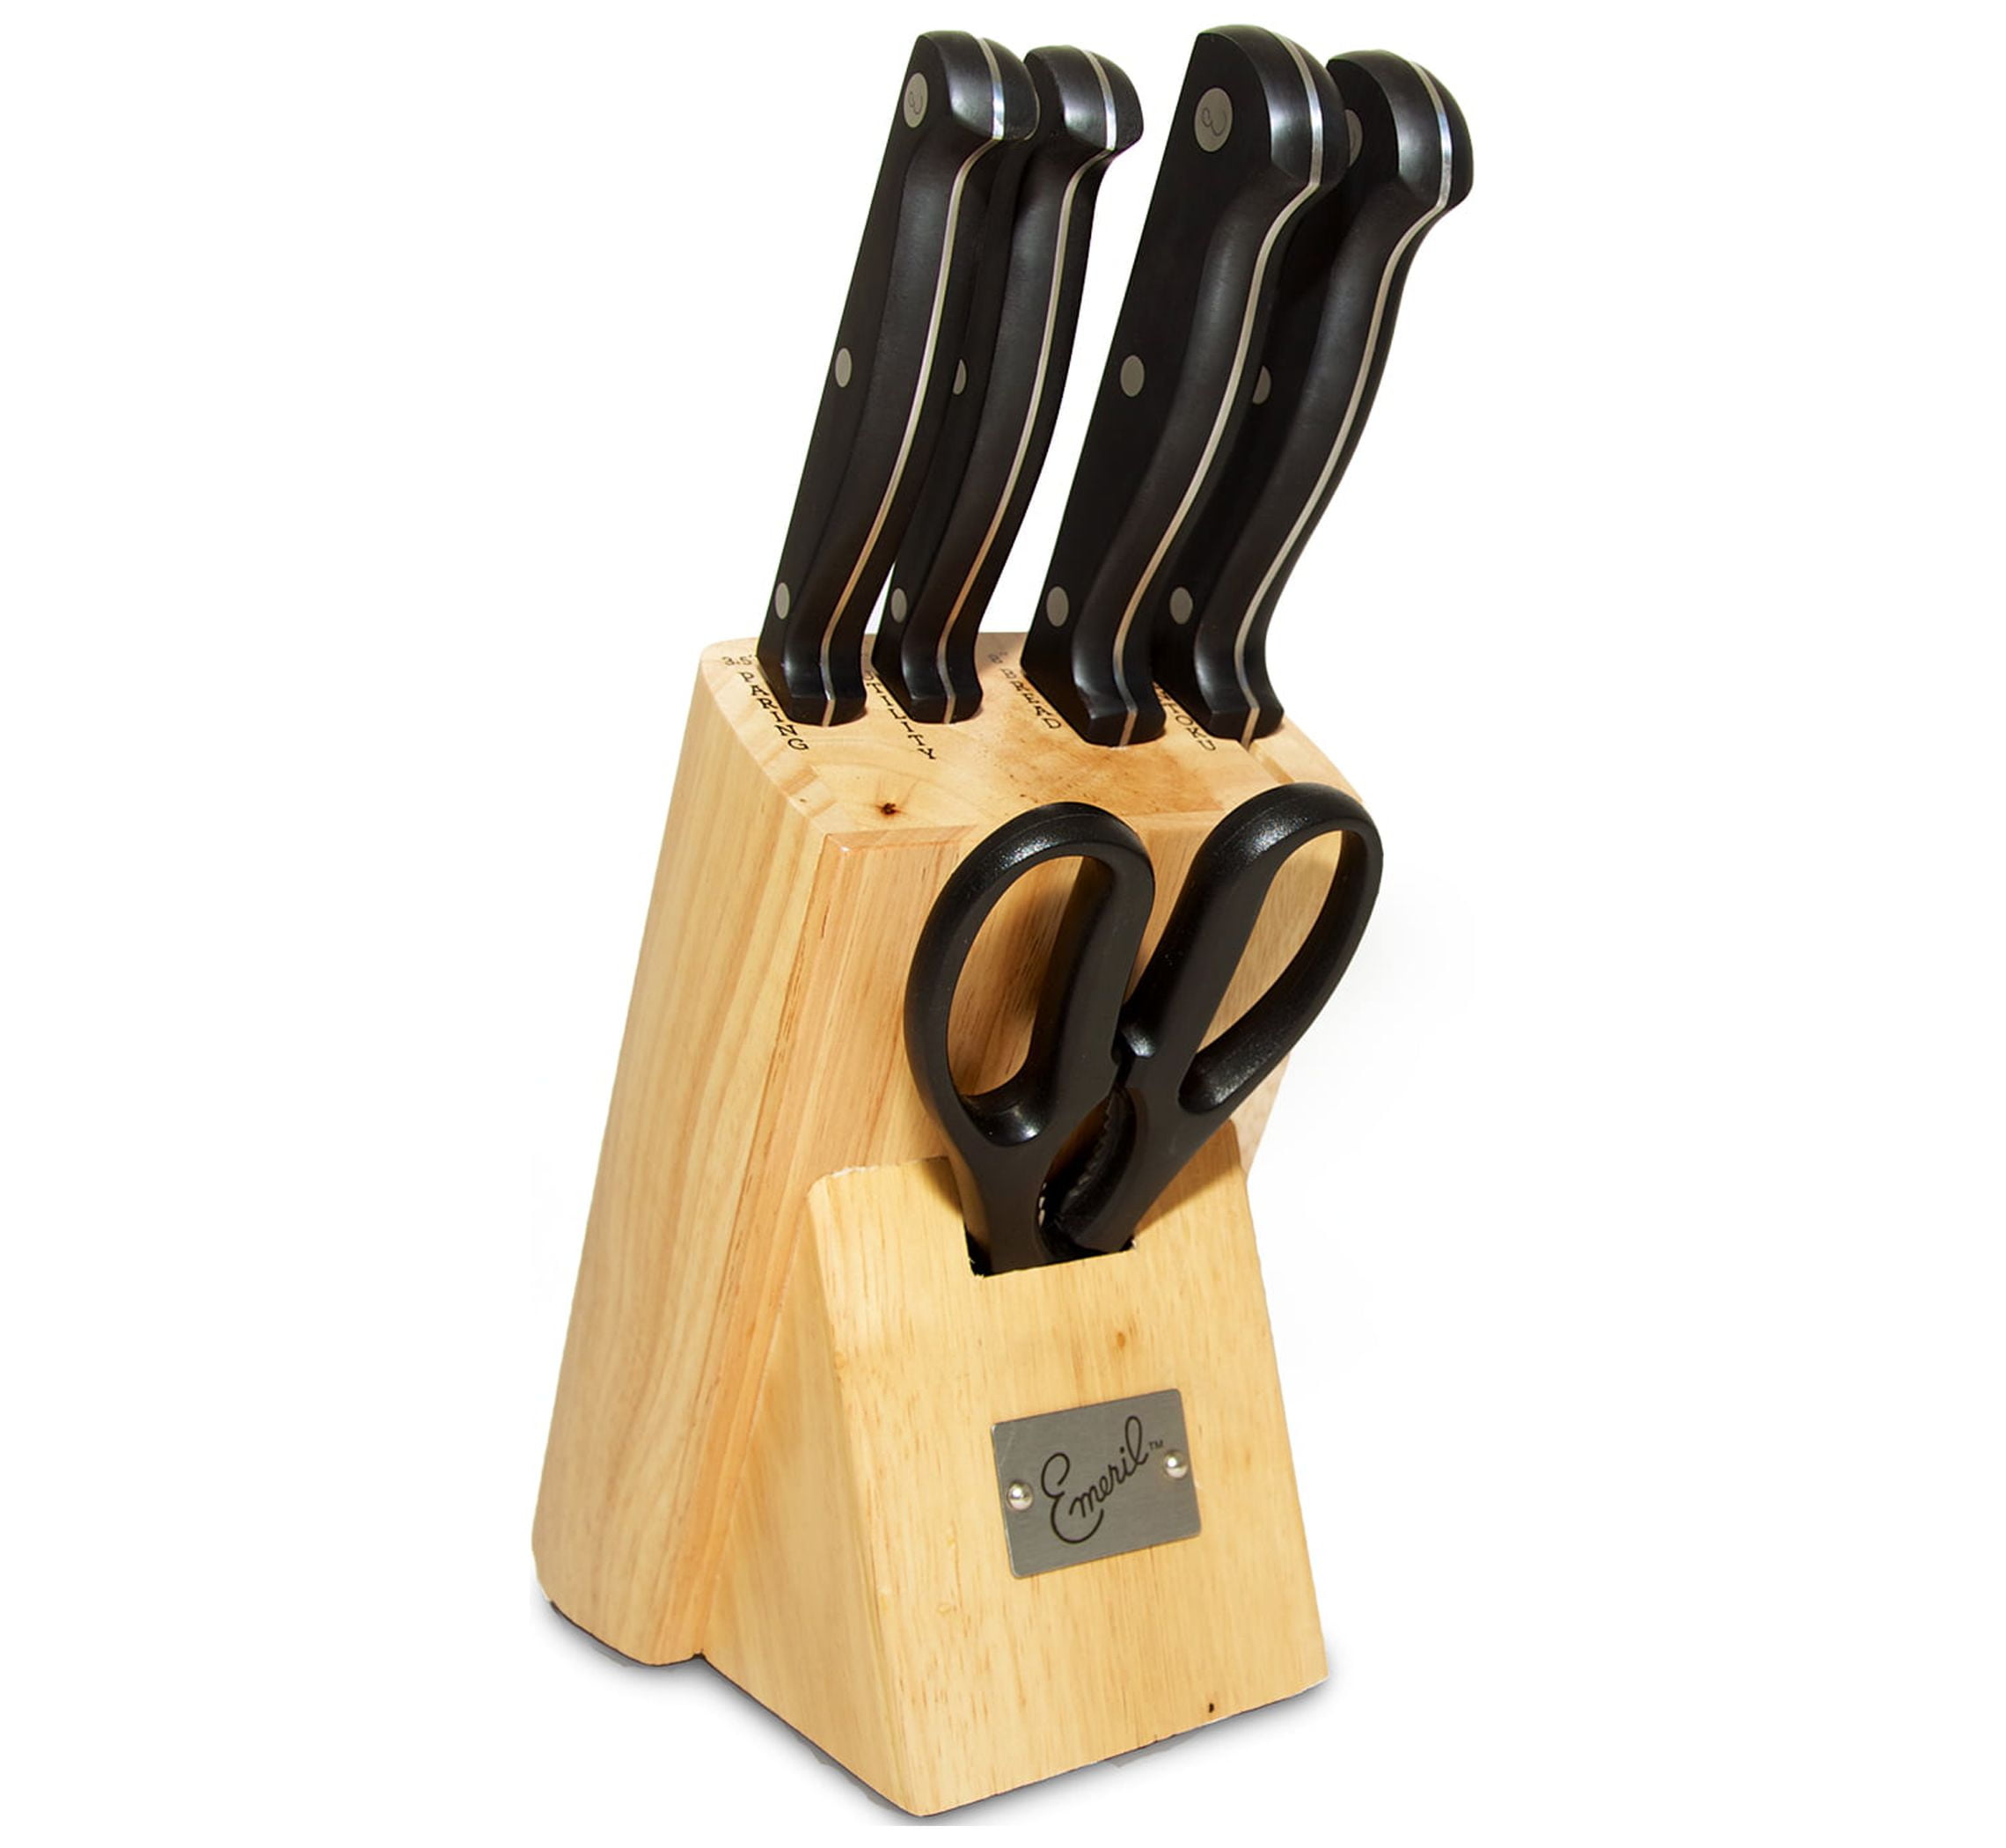 Emeril Lagasse Forged Cutlery Set in Acacia Wood Block (17-Piece